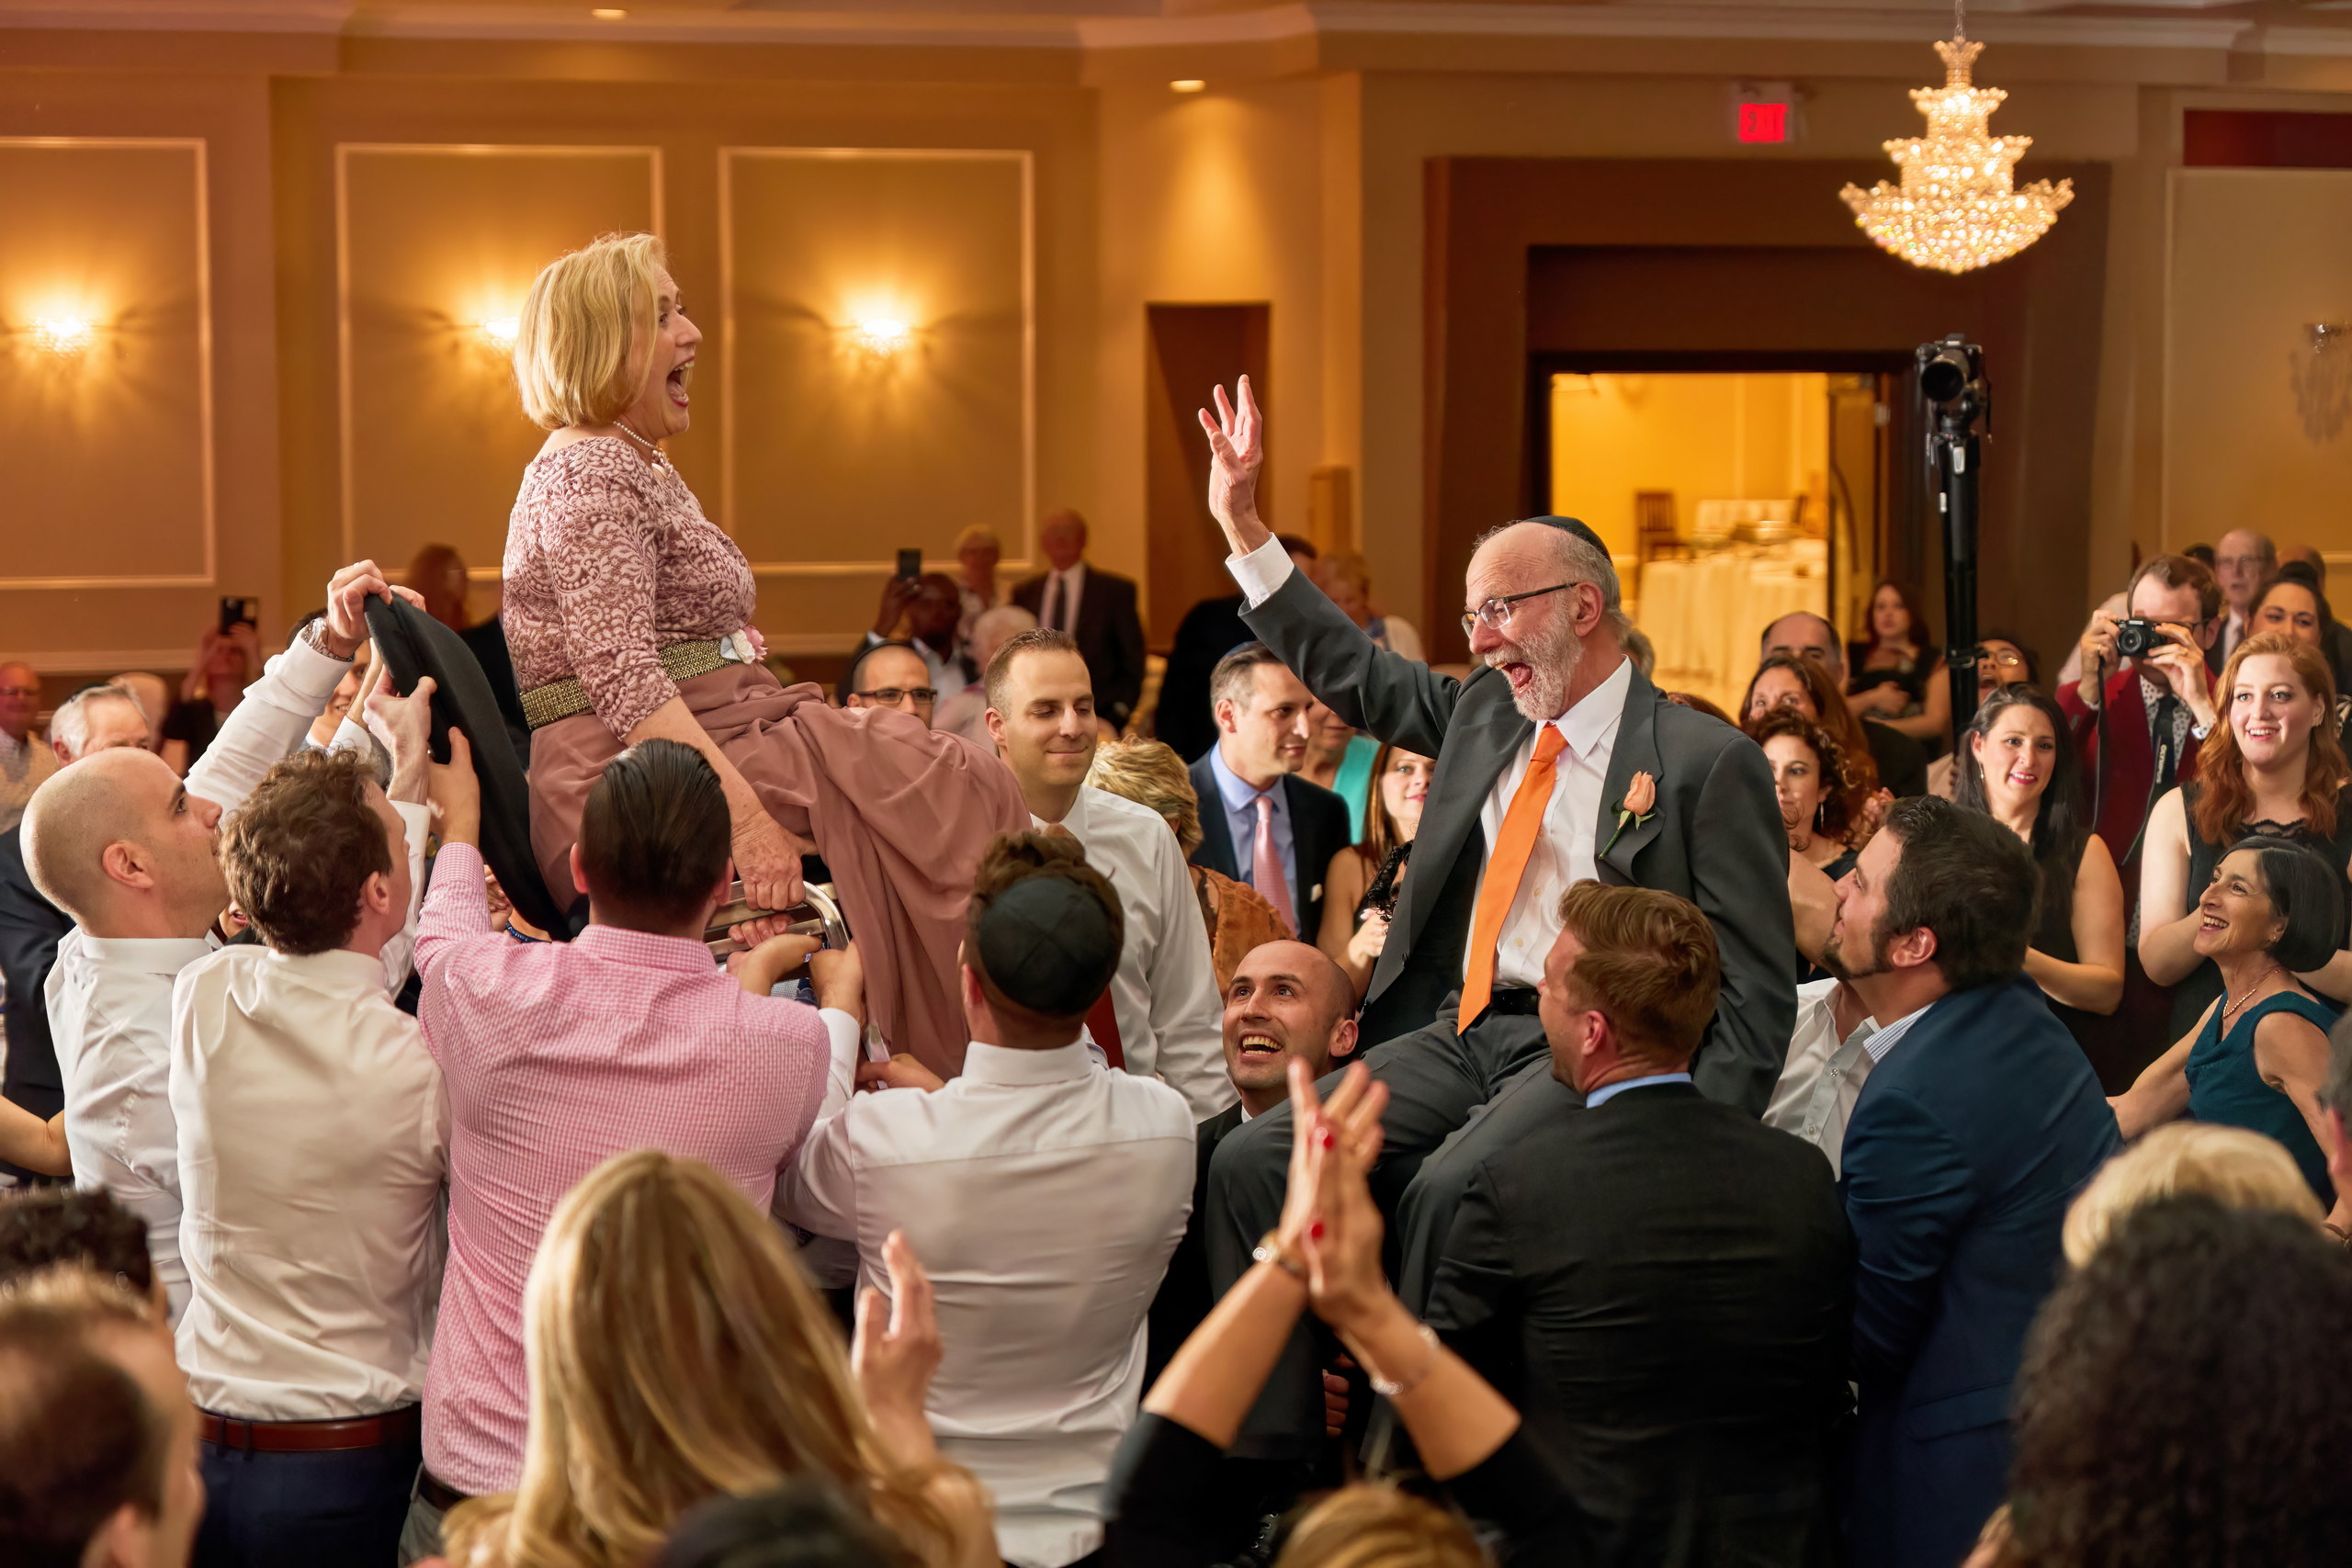 Parents of the Wedding Couple Excitedly Doing the Hora Dance at a Jewish Wedding in Toronto